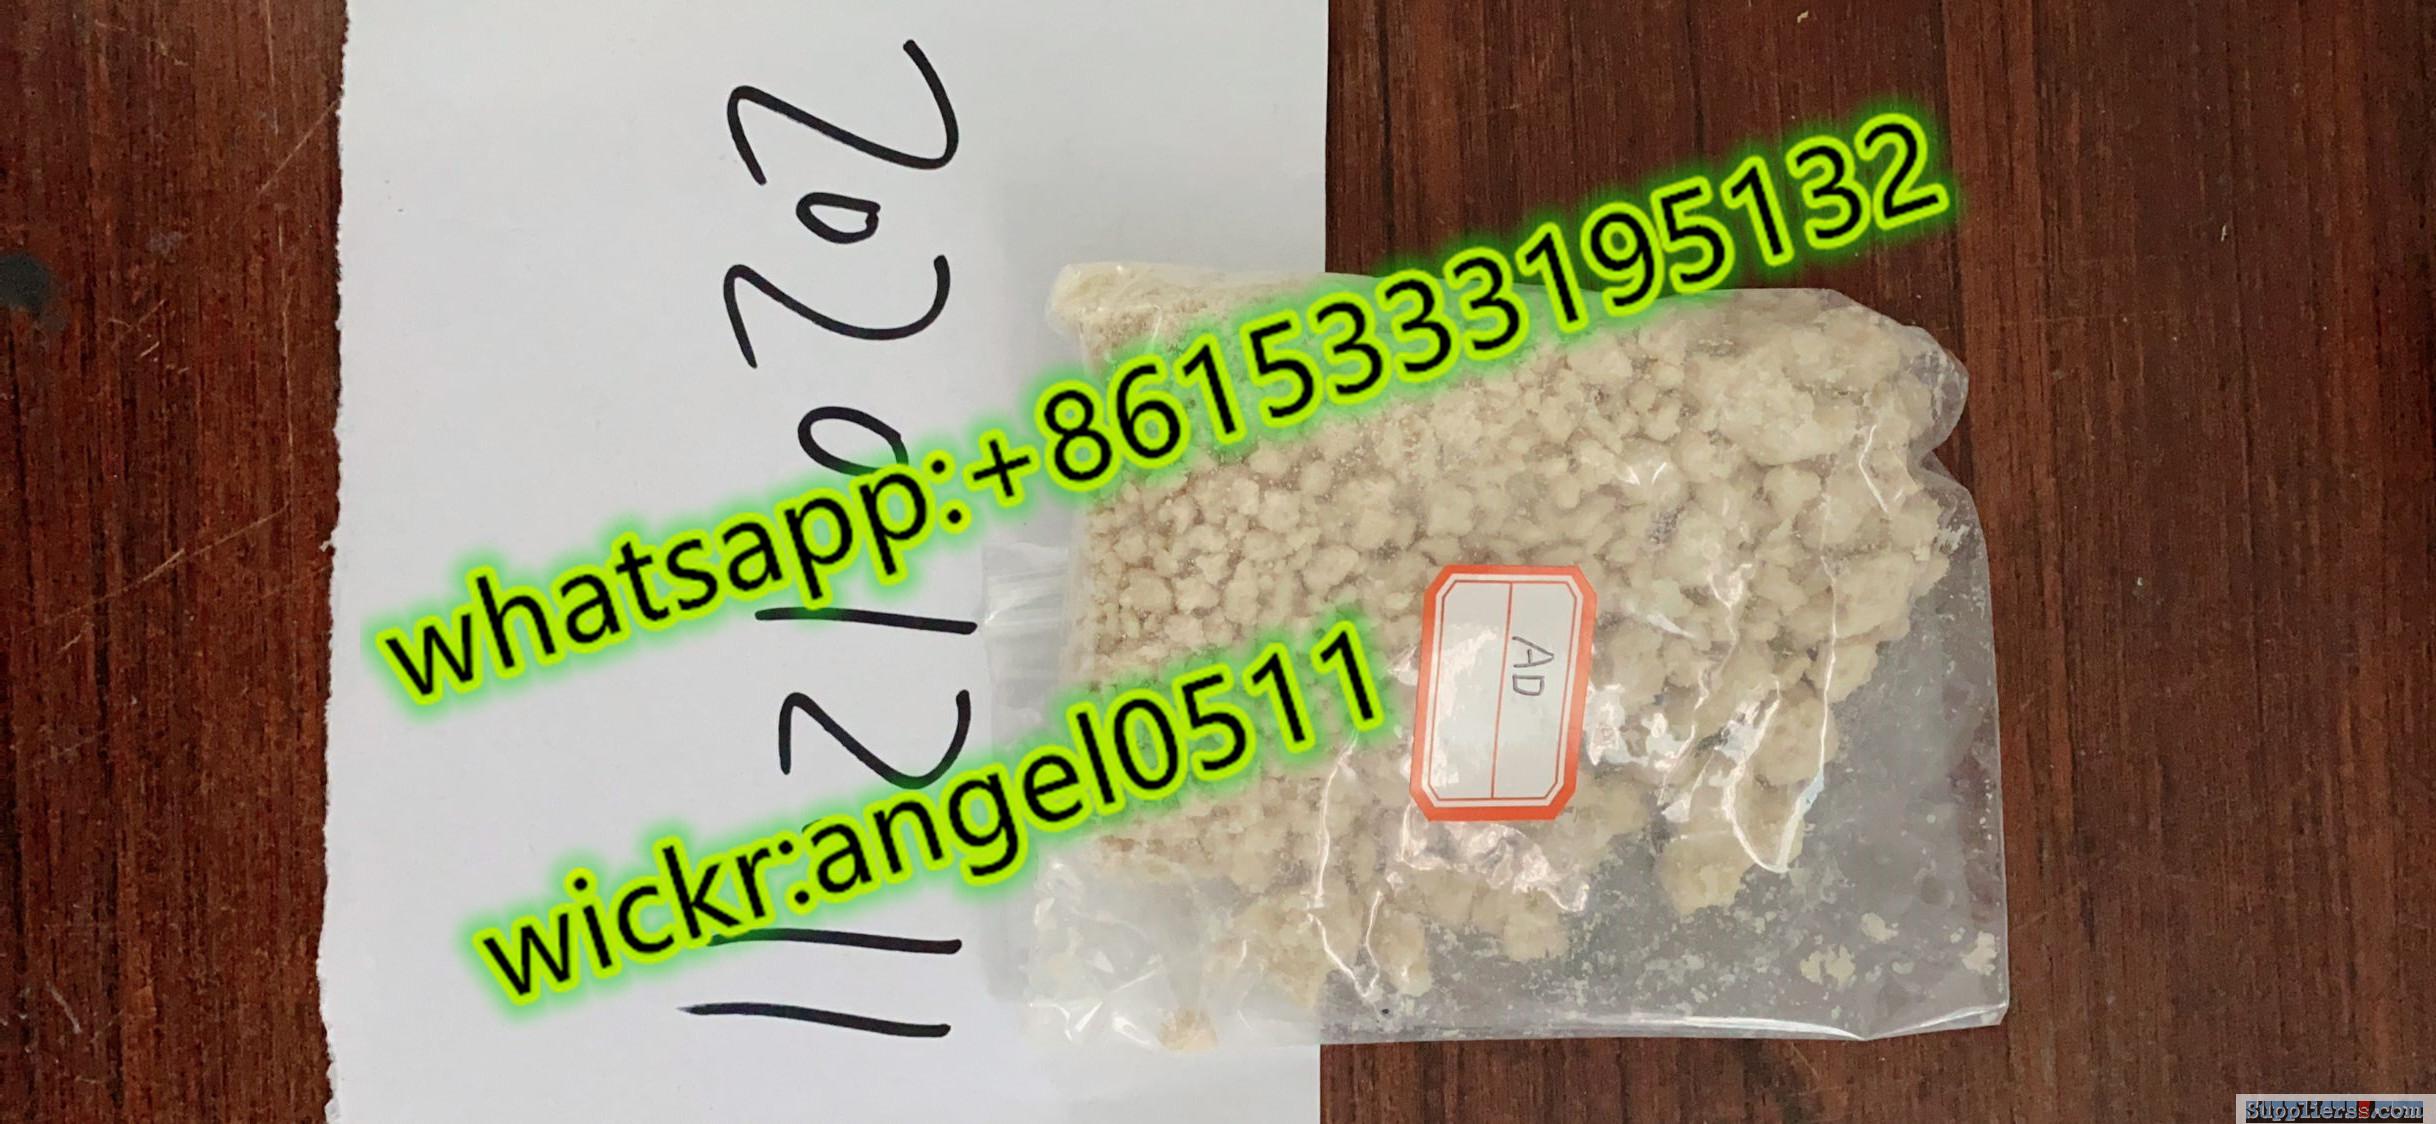 ADC sale(wickr:angel0511)